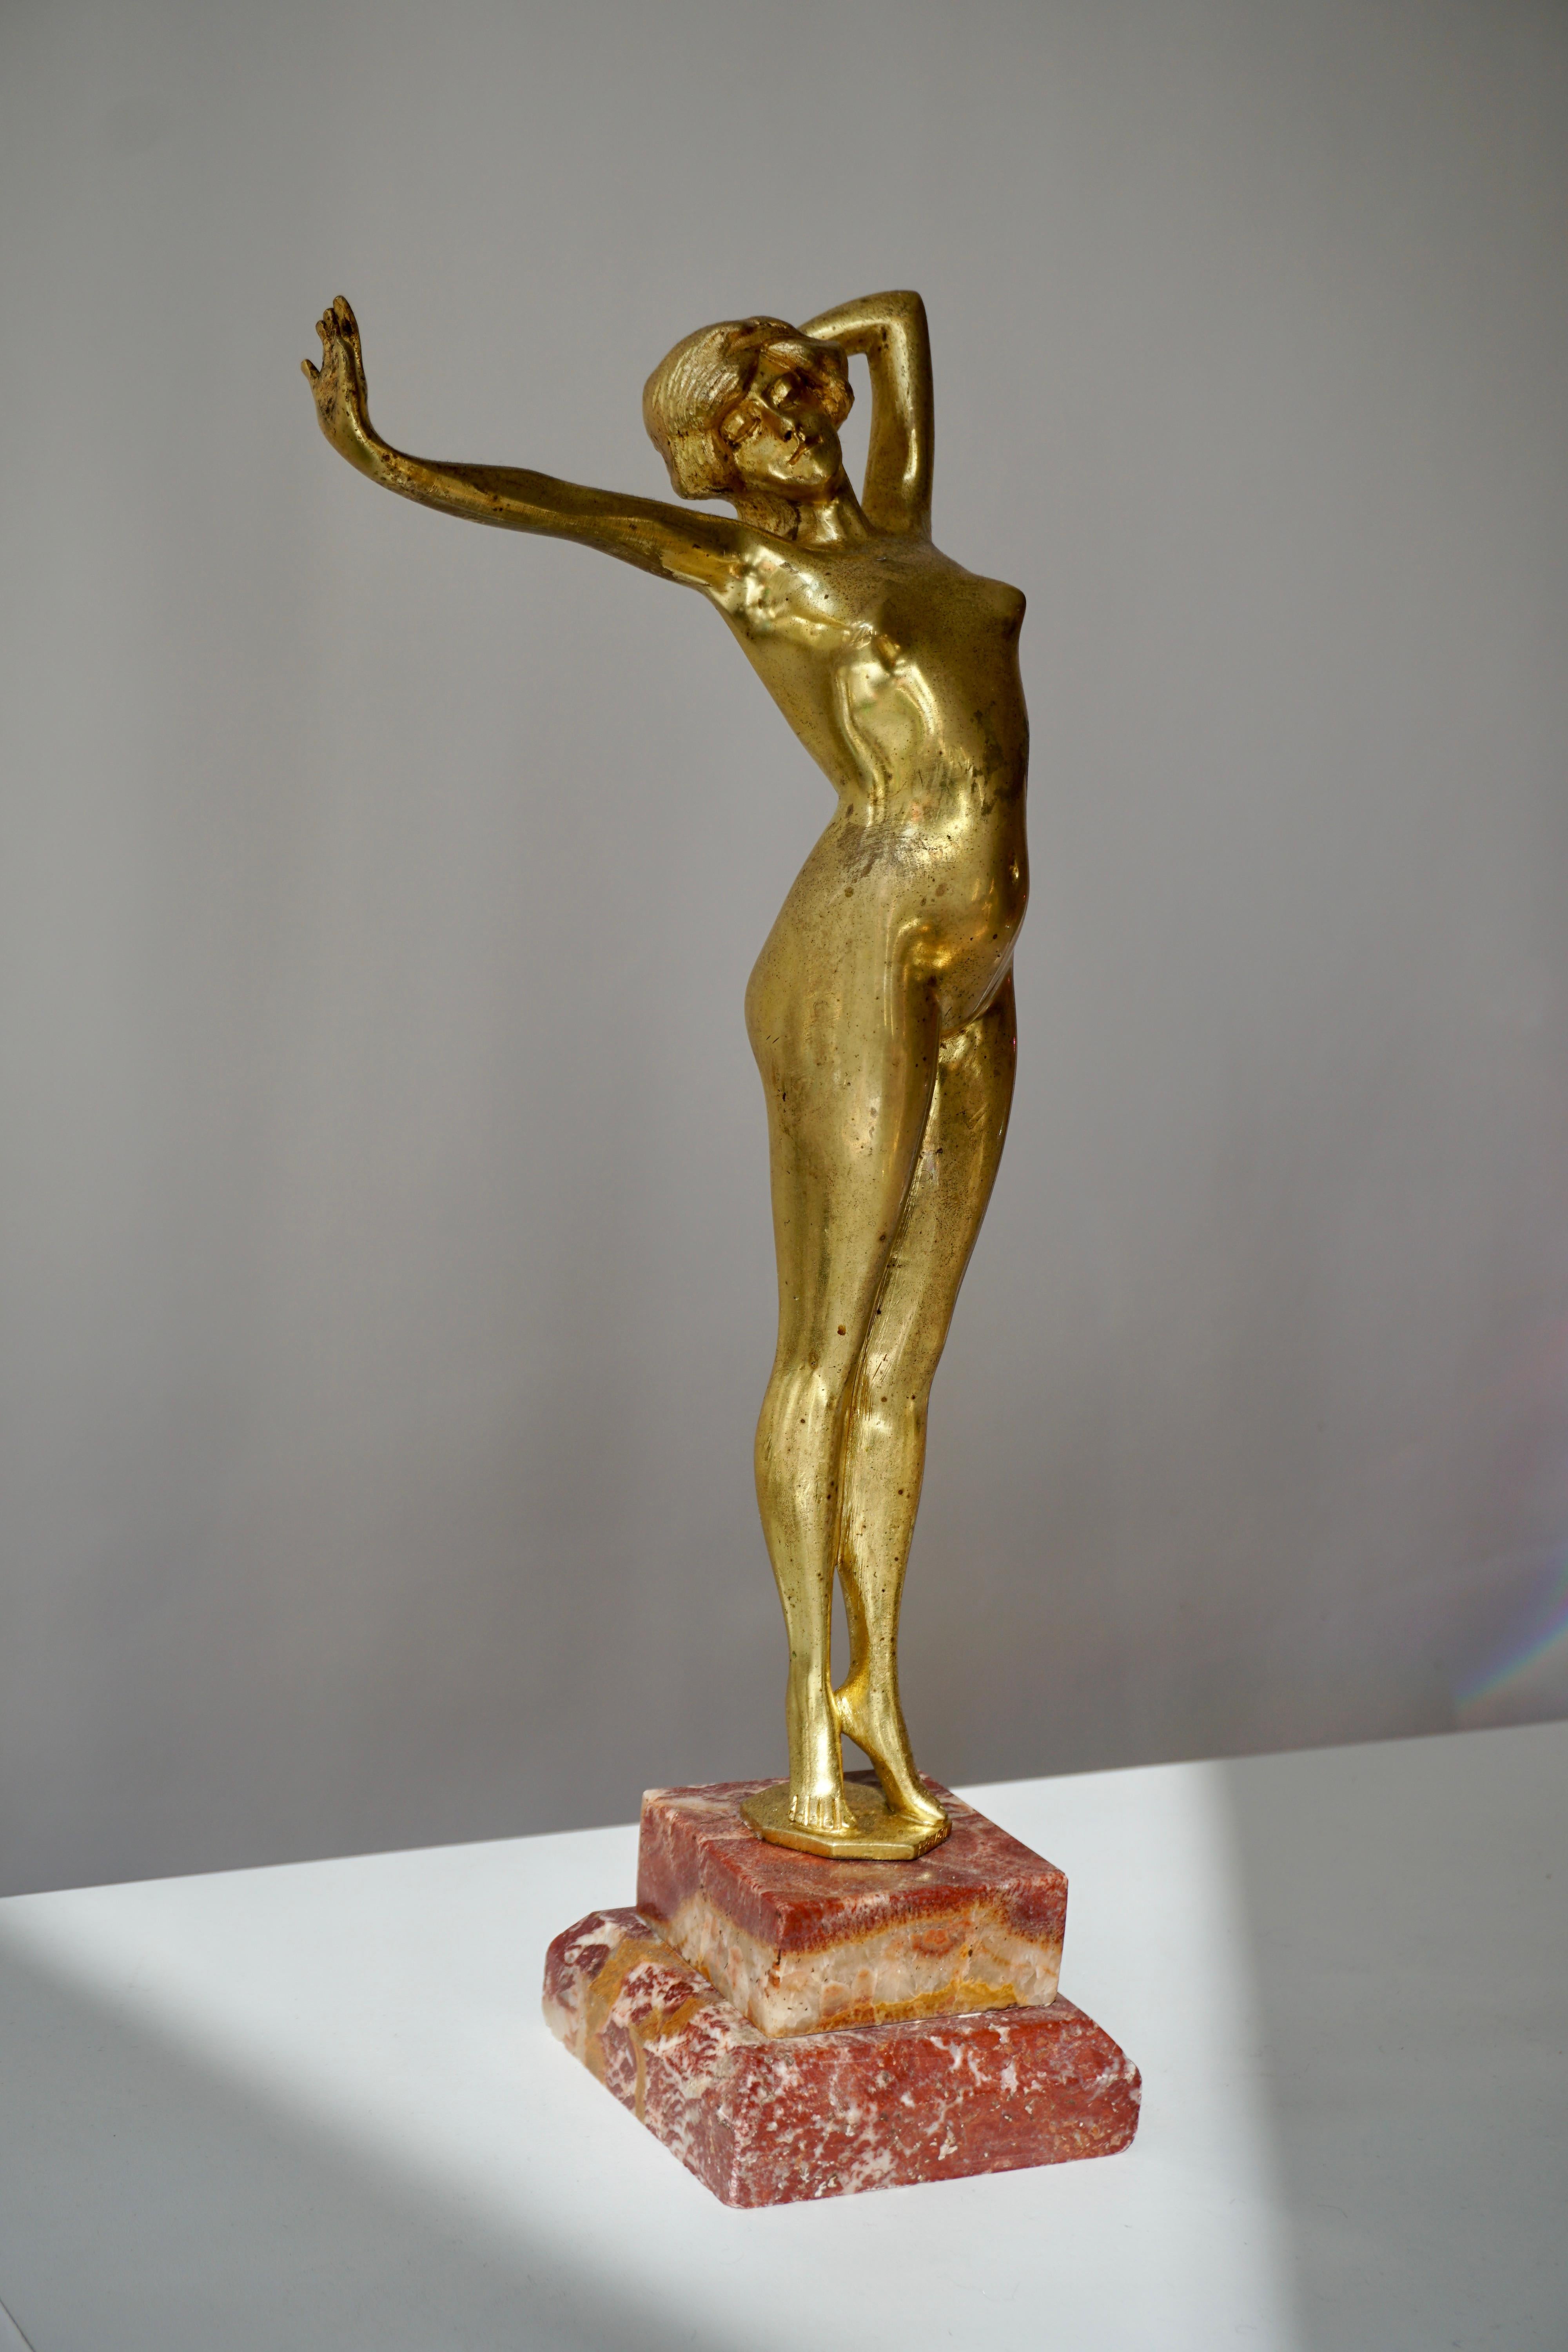 Art Deco gilt bronze statue signed Reveil. This sculpture was made in the mid-1920s in the Art Nouveau and Art Deco period.
It was probably made by Paul Philippe.This is authentic, vintage, in gilded bronze with a natural patina, and a beautiful